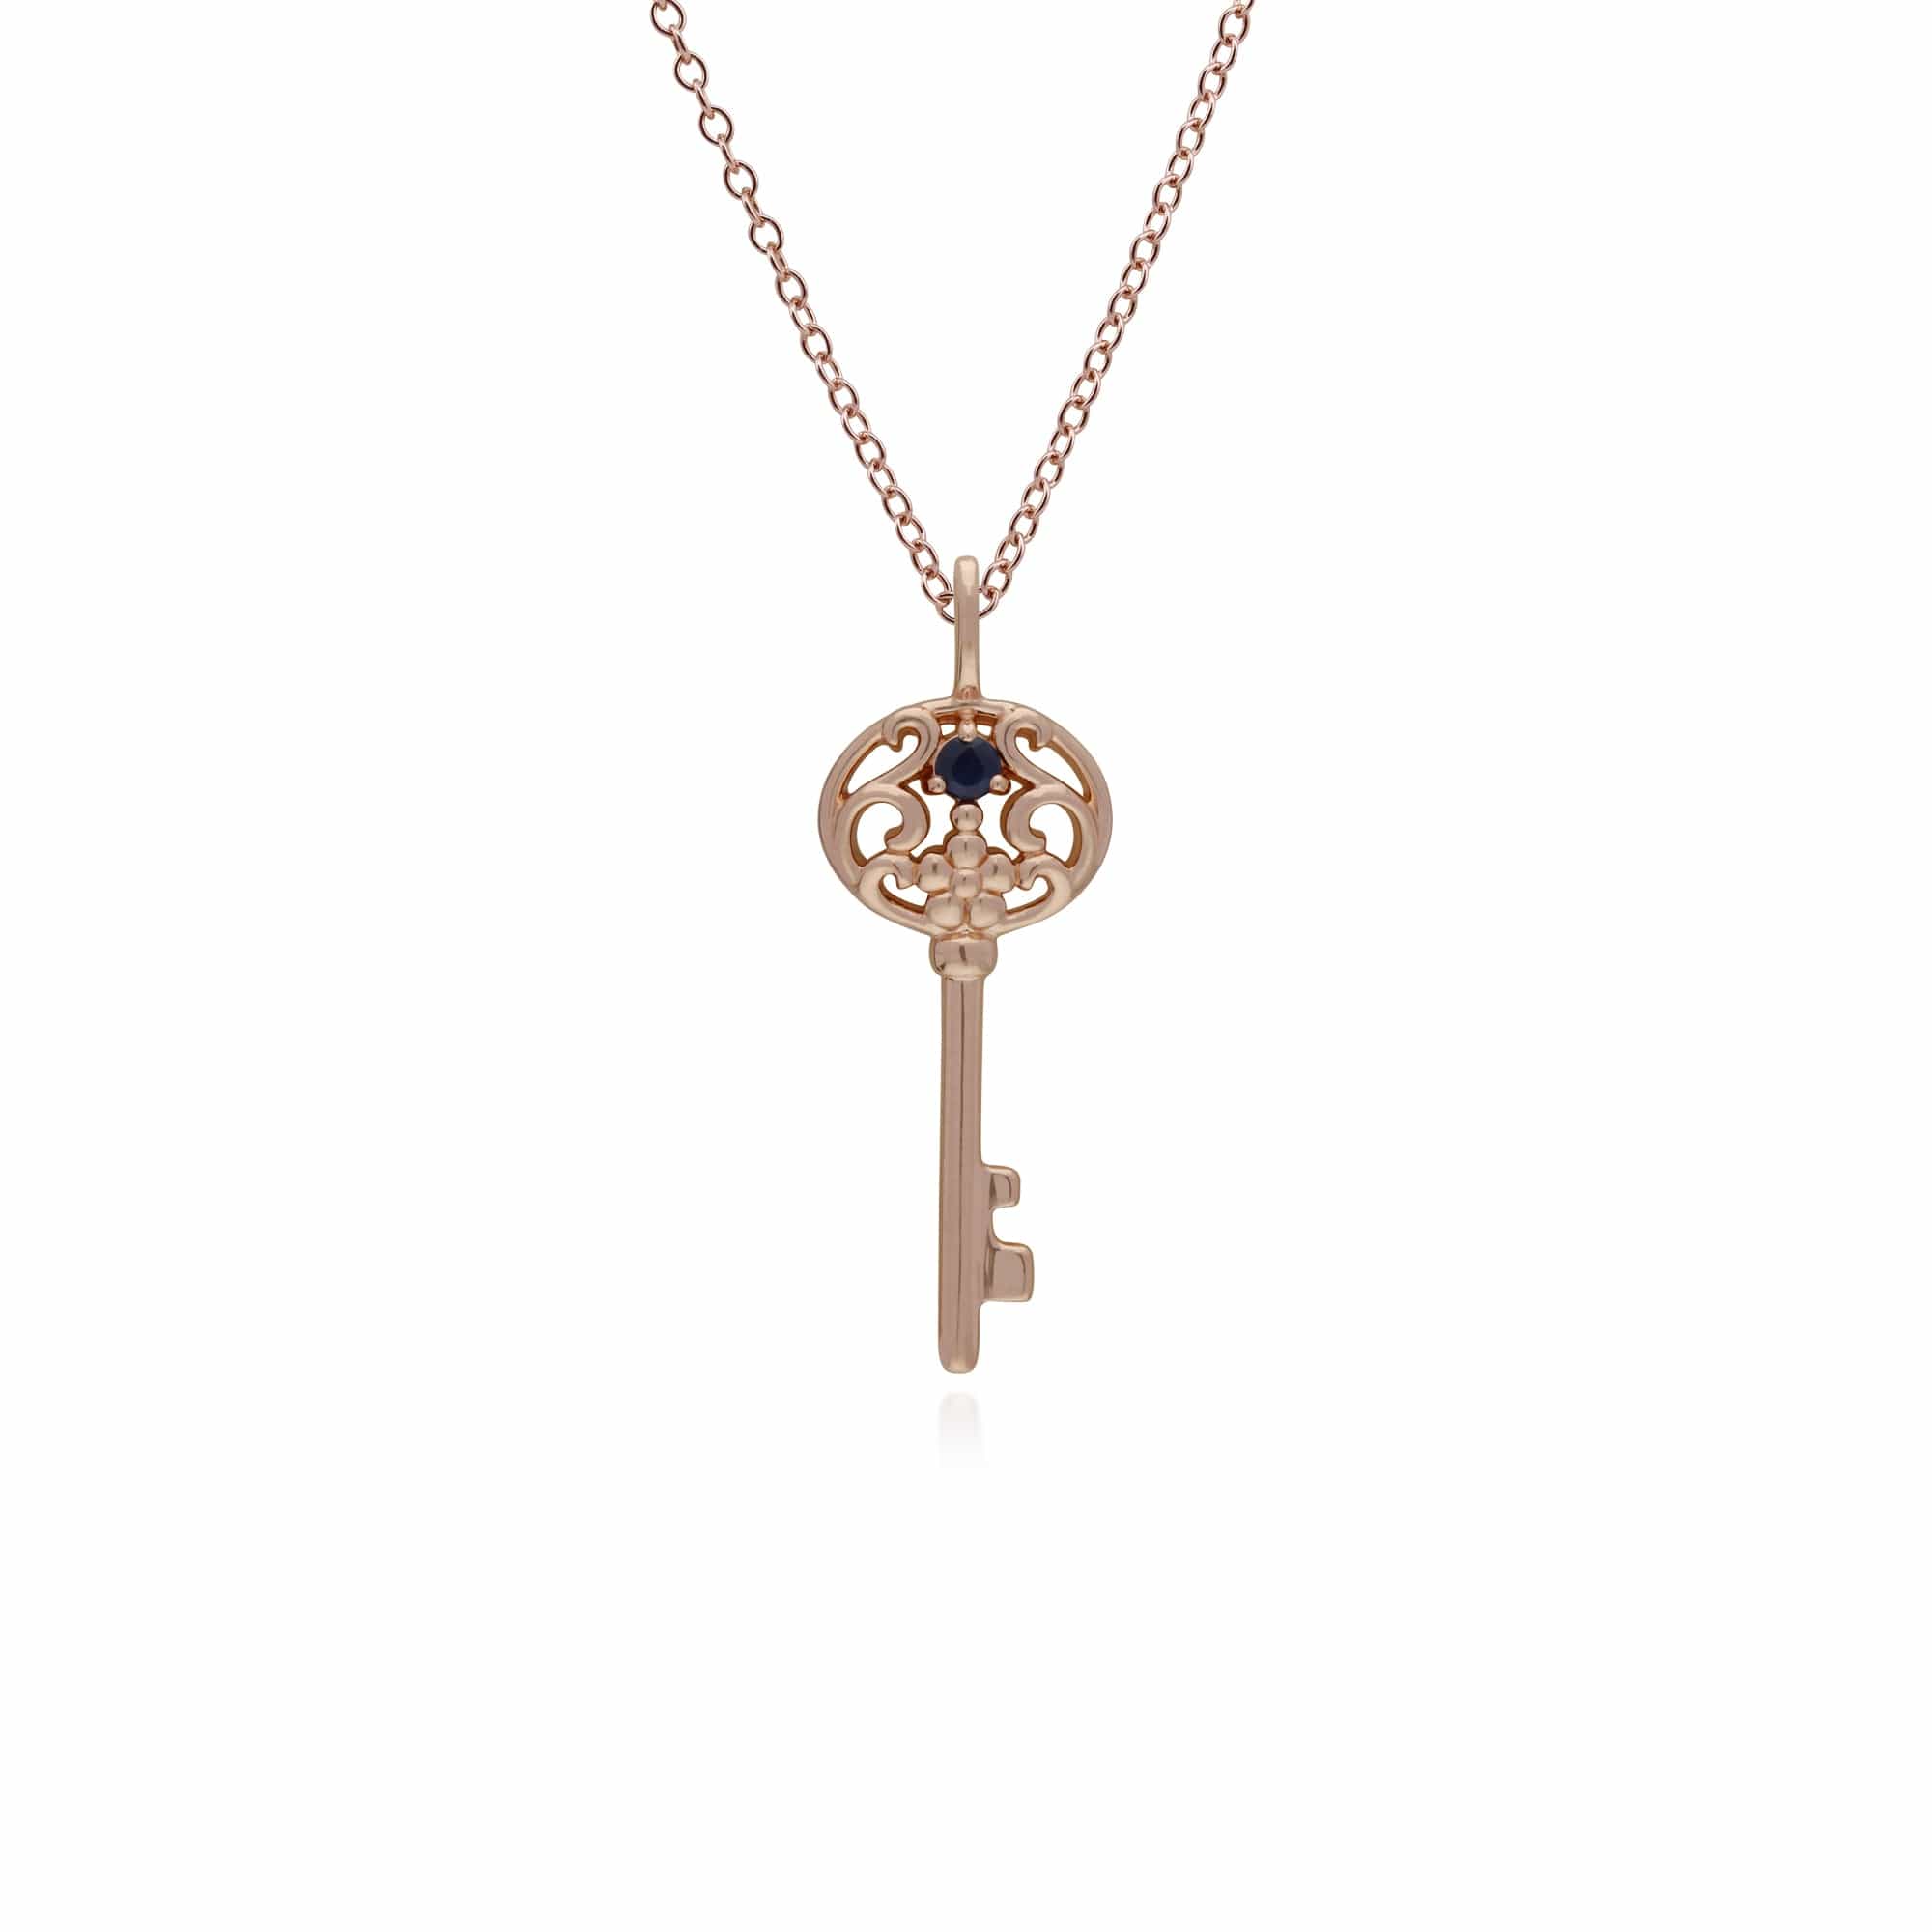 270P026701925-270P026501925 Classic Swirl Heart Lock Pendant & Sapphire Big Key Charm in Rose Gold Plated 925 Sterling Silver 2